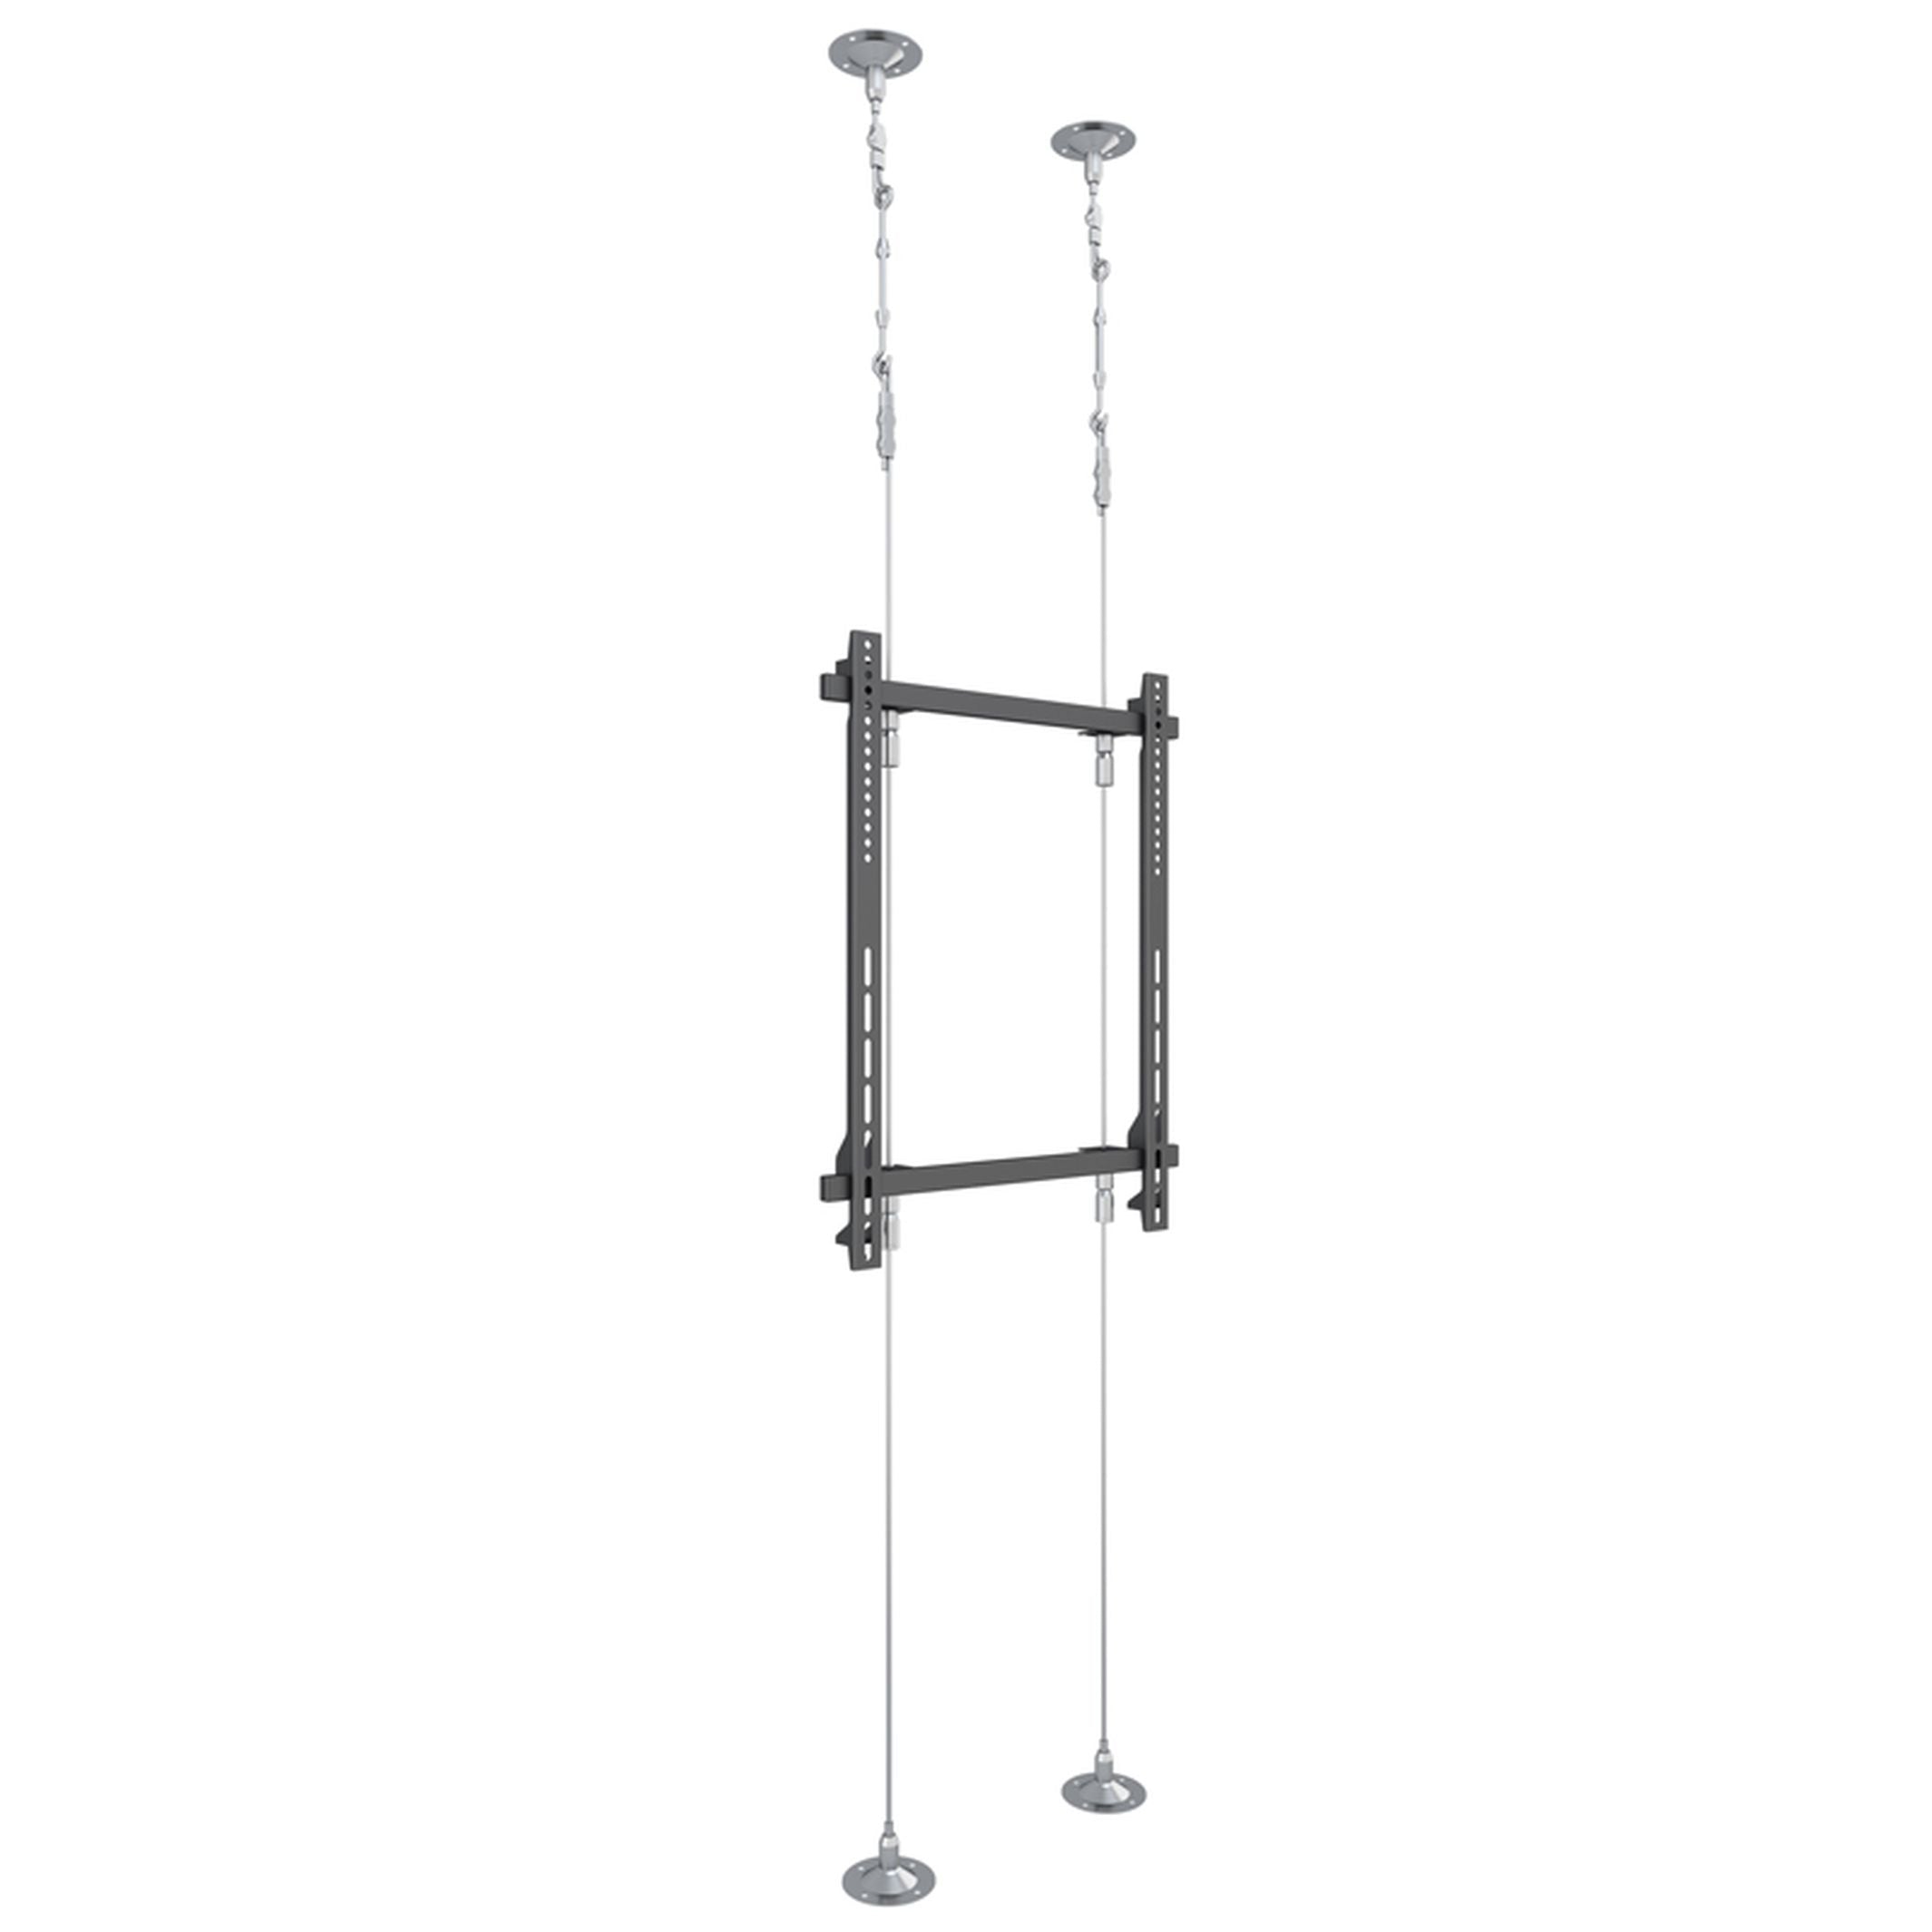 Single-Screen Wire-Supported Floor-to-Ceiling Mount (6000mm / 236.22" wire height)